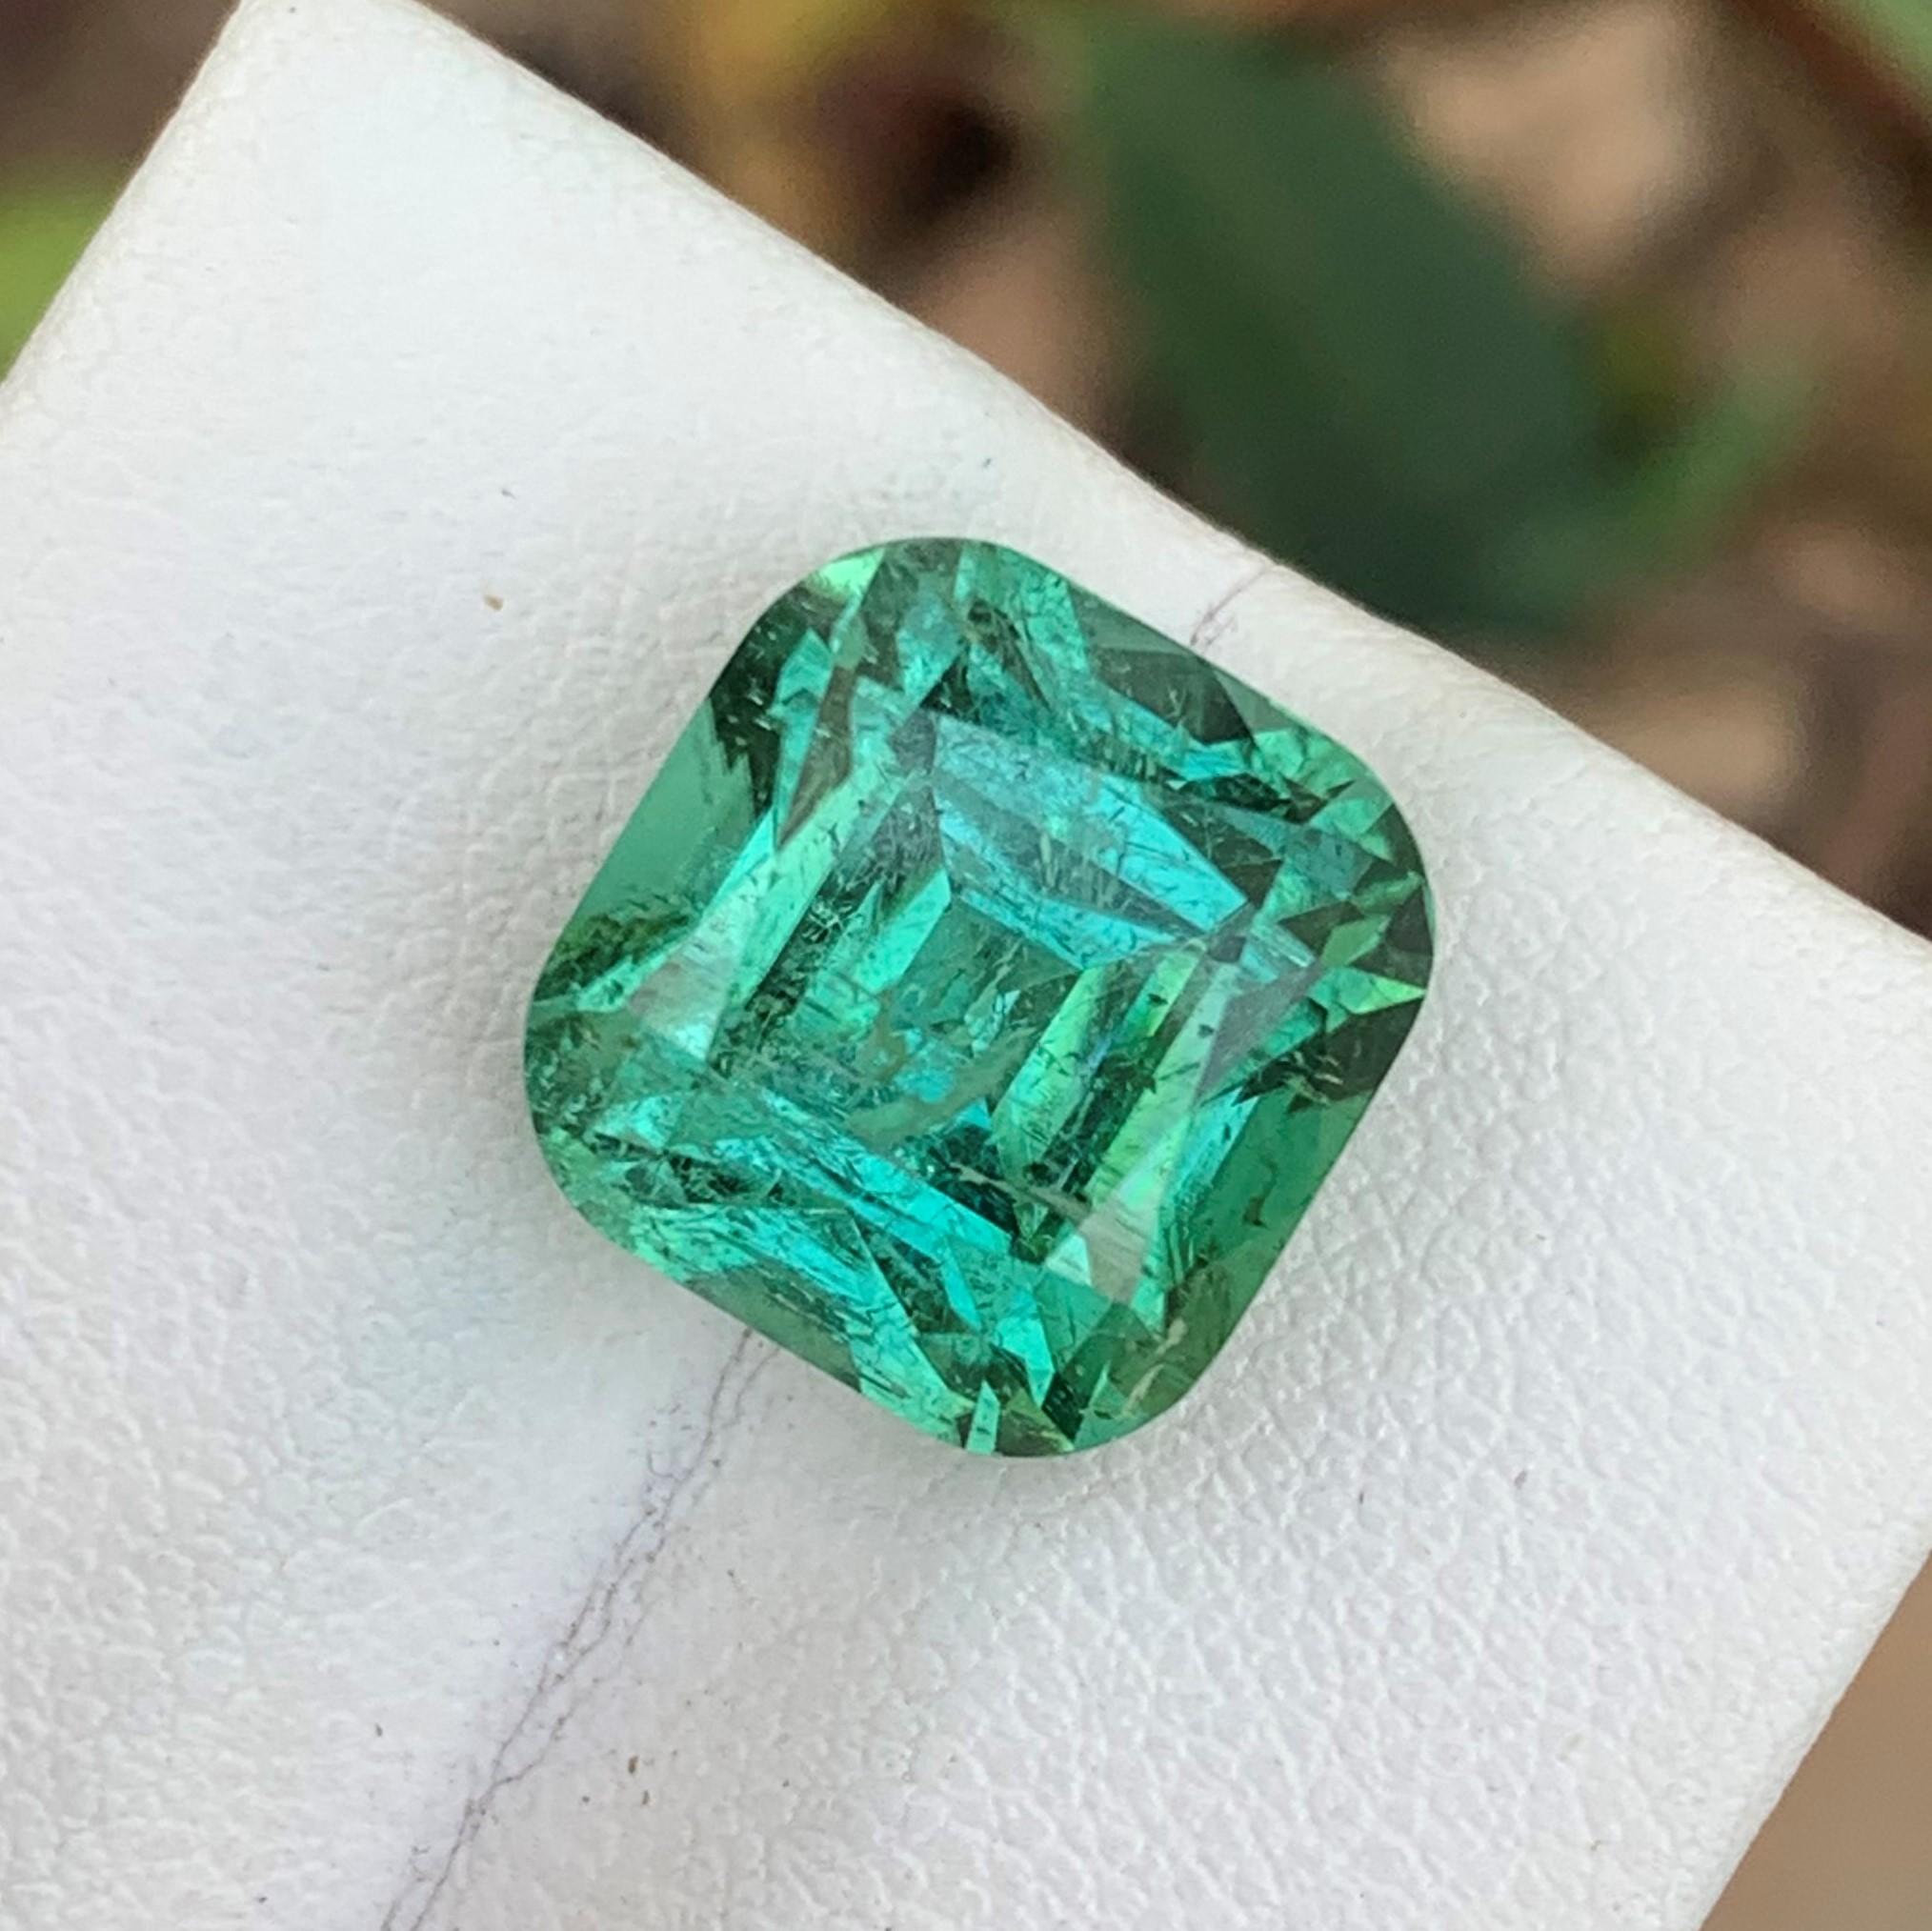 Gemstone Type : Tourmaline
Weight : 9.90 Carats
Dimensions : 11.6x11.5x9.9 Mm
Origin : Kunar Afghanistan
Clarity : Eye Clean
Shape: Cushion
Color: Mint Seafoam
Certificate: On Demand
Basically, mint tourmalines are tourmalines with pastel hues of